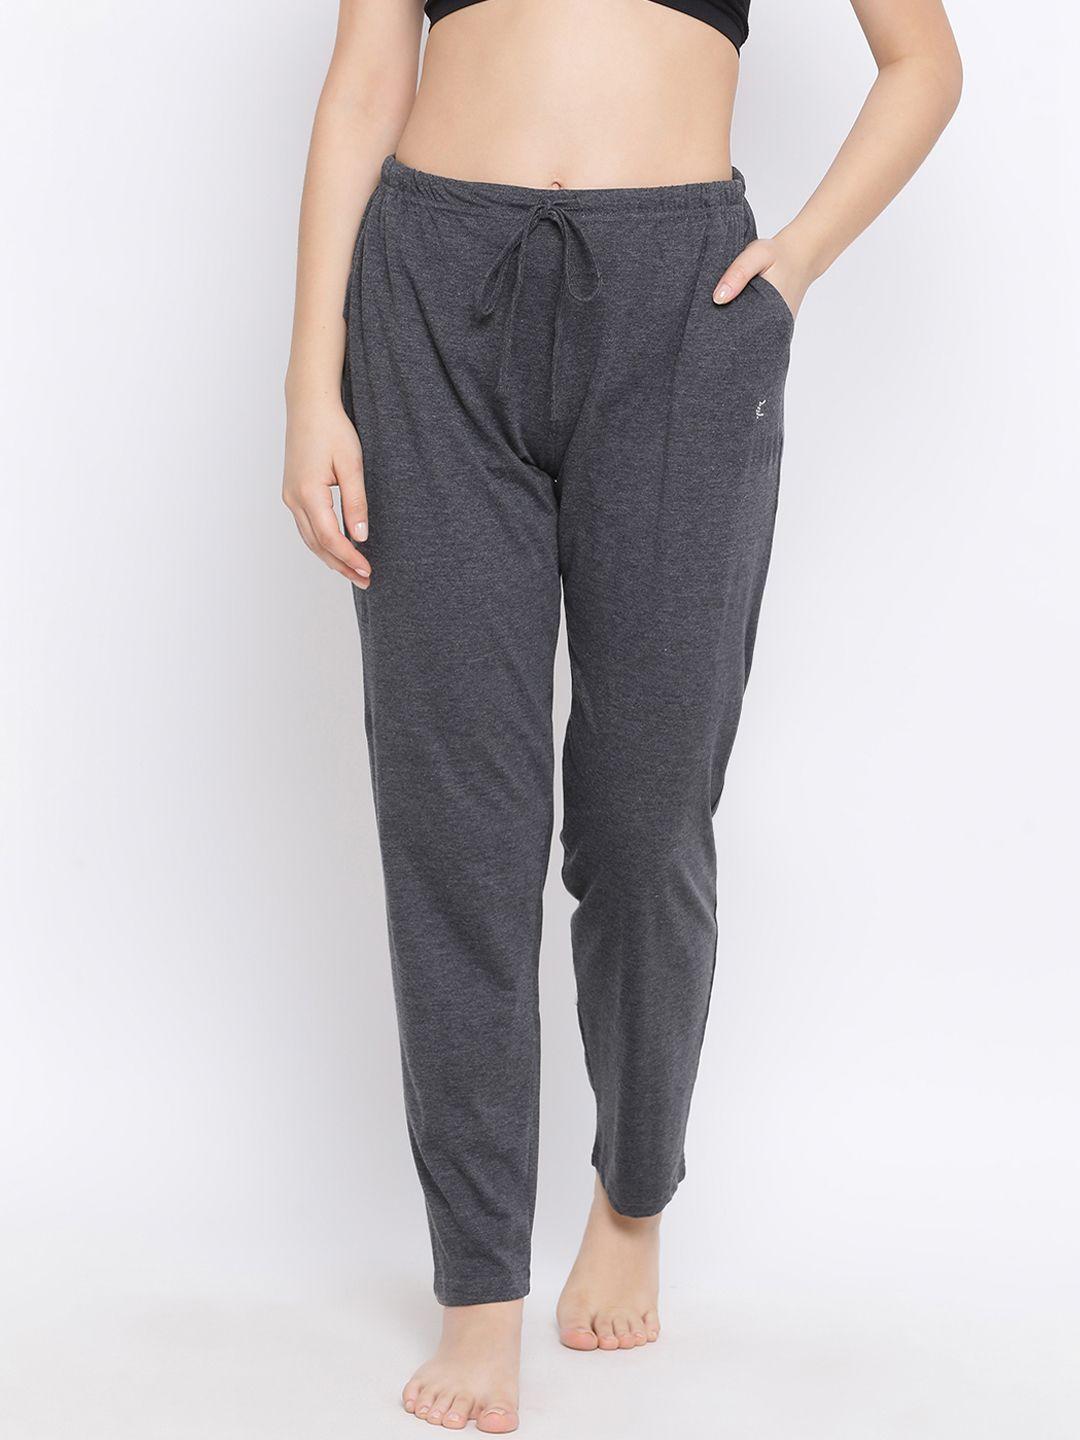 kanvin-women-charcoal-grey-solid-lounge-pants